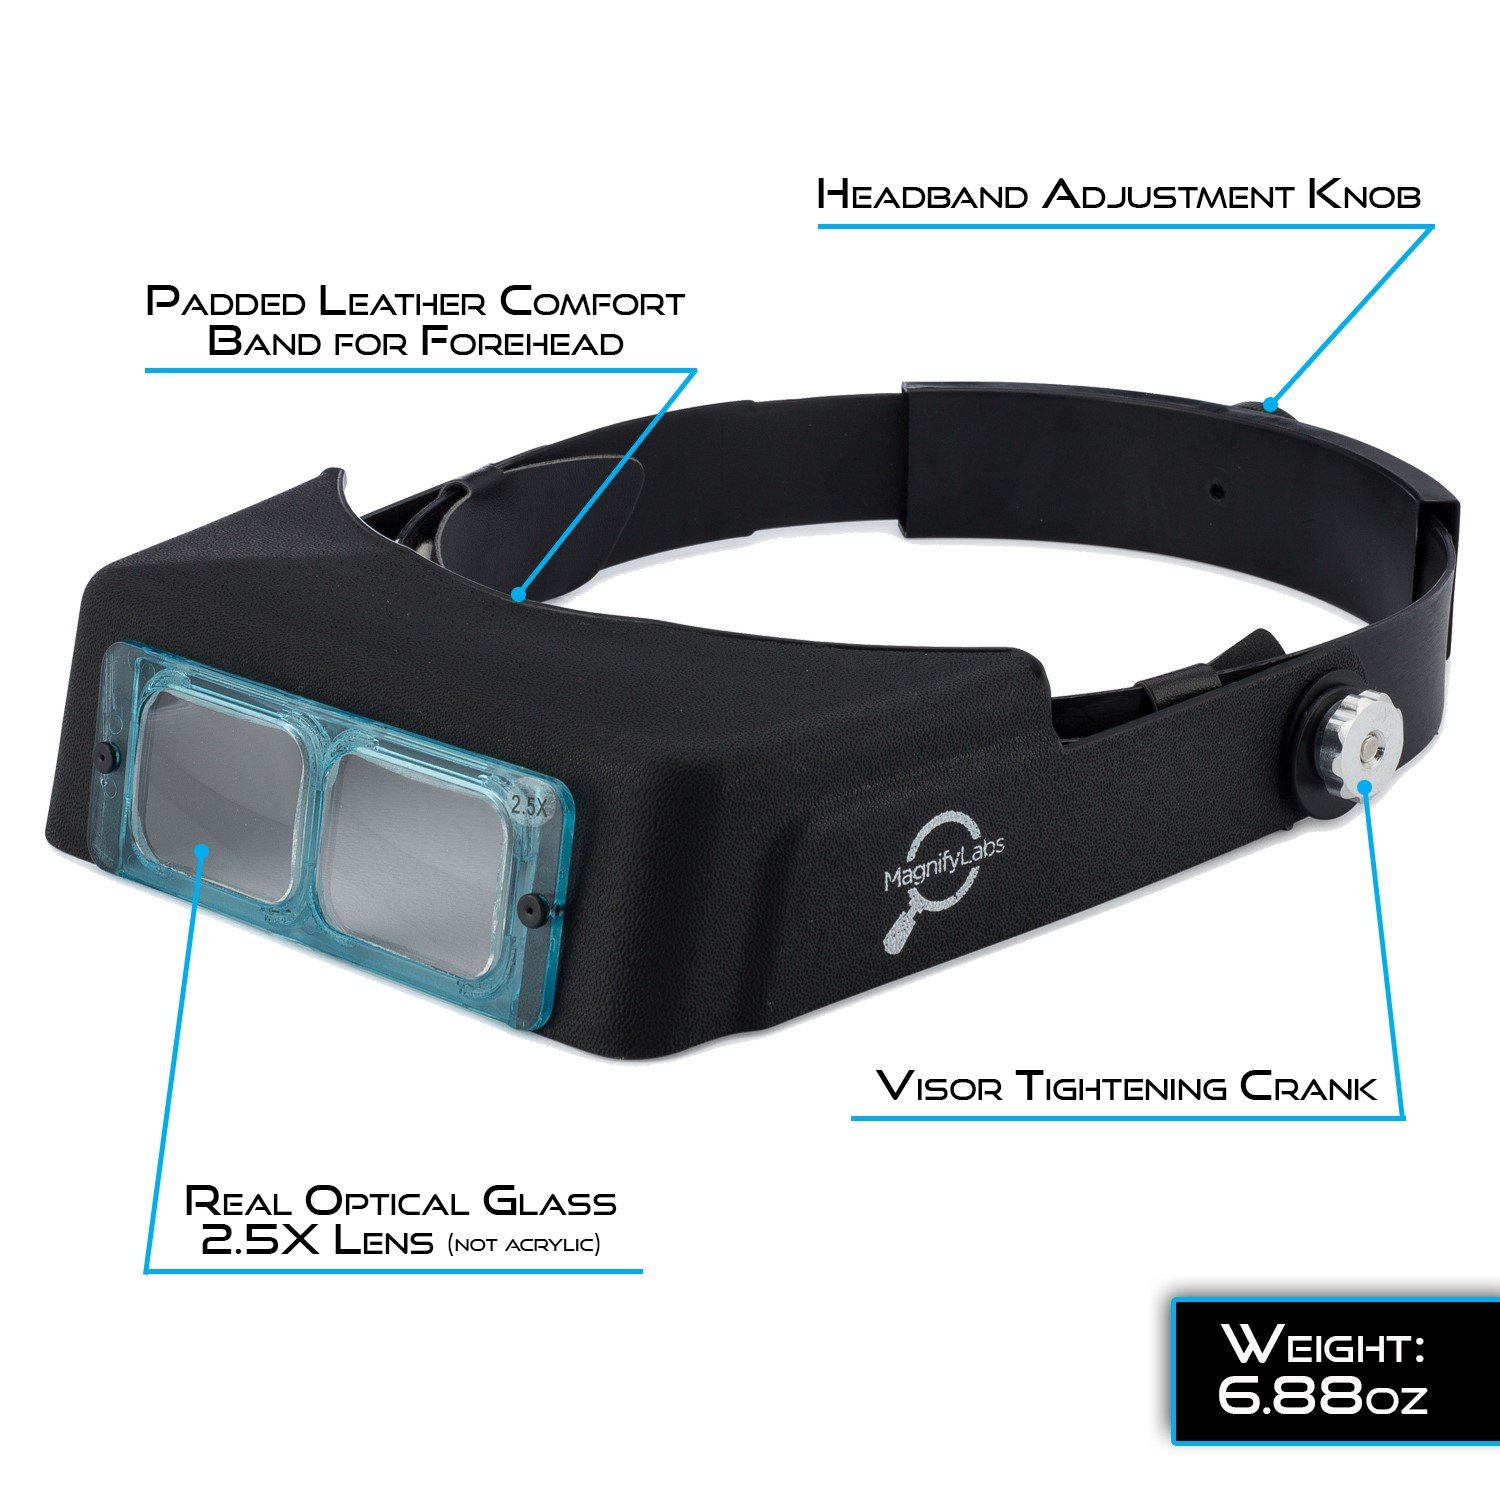 Headband Magnifier Headset - Magnifying Visor with 4 Real Glass Optical Lens Plates (1.5X, 2X, 2.5X, 3.5X)